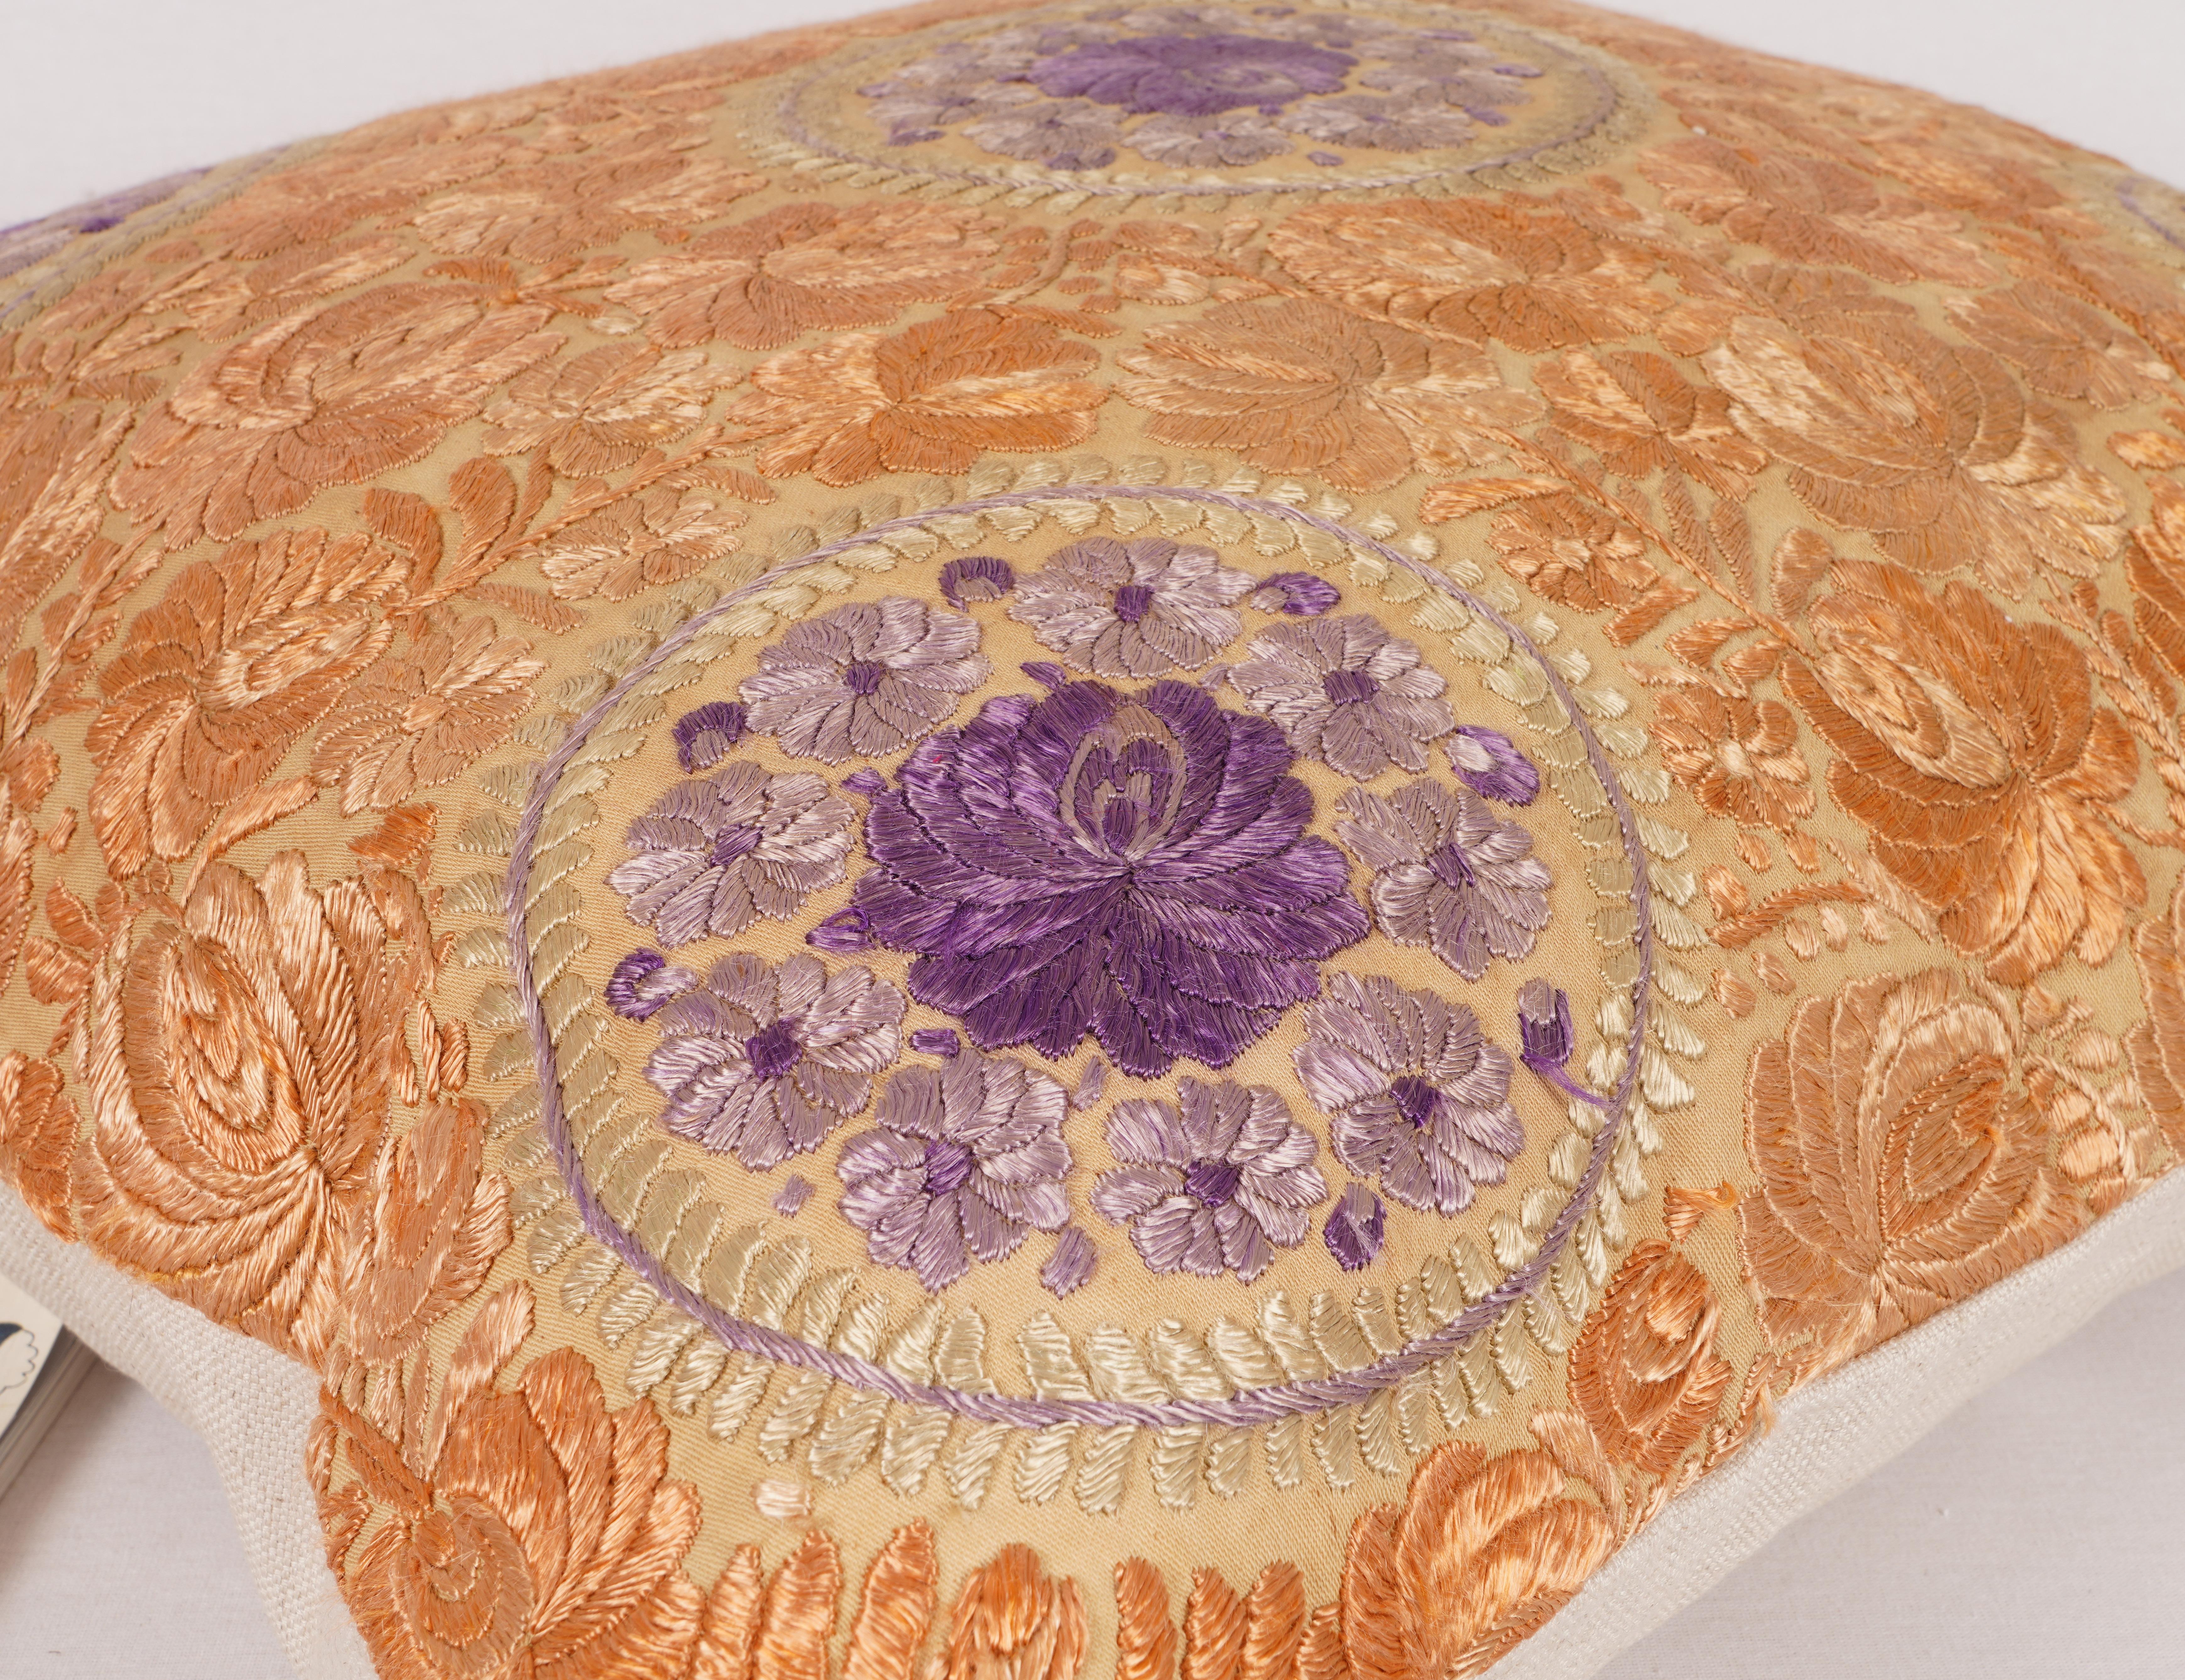 Silk Pillowcase Made from a Matyo Embroidery, Hungary, Early 20th C. For Sale